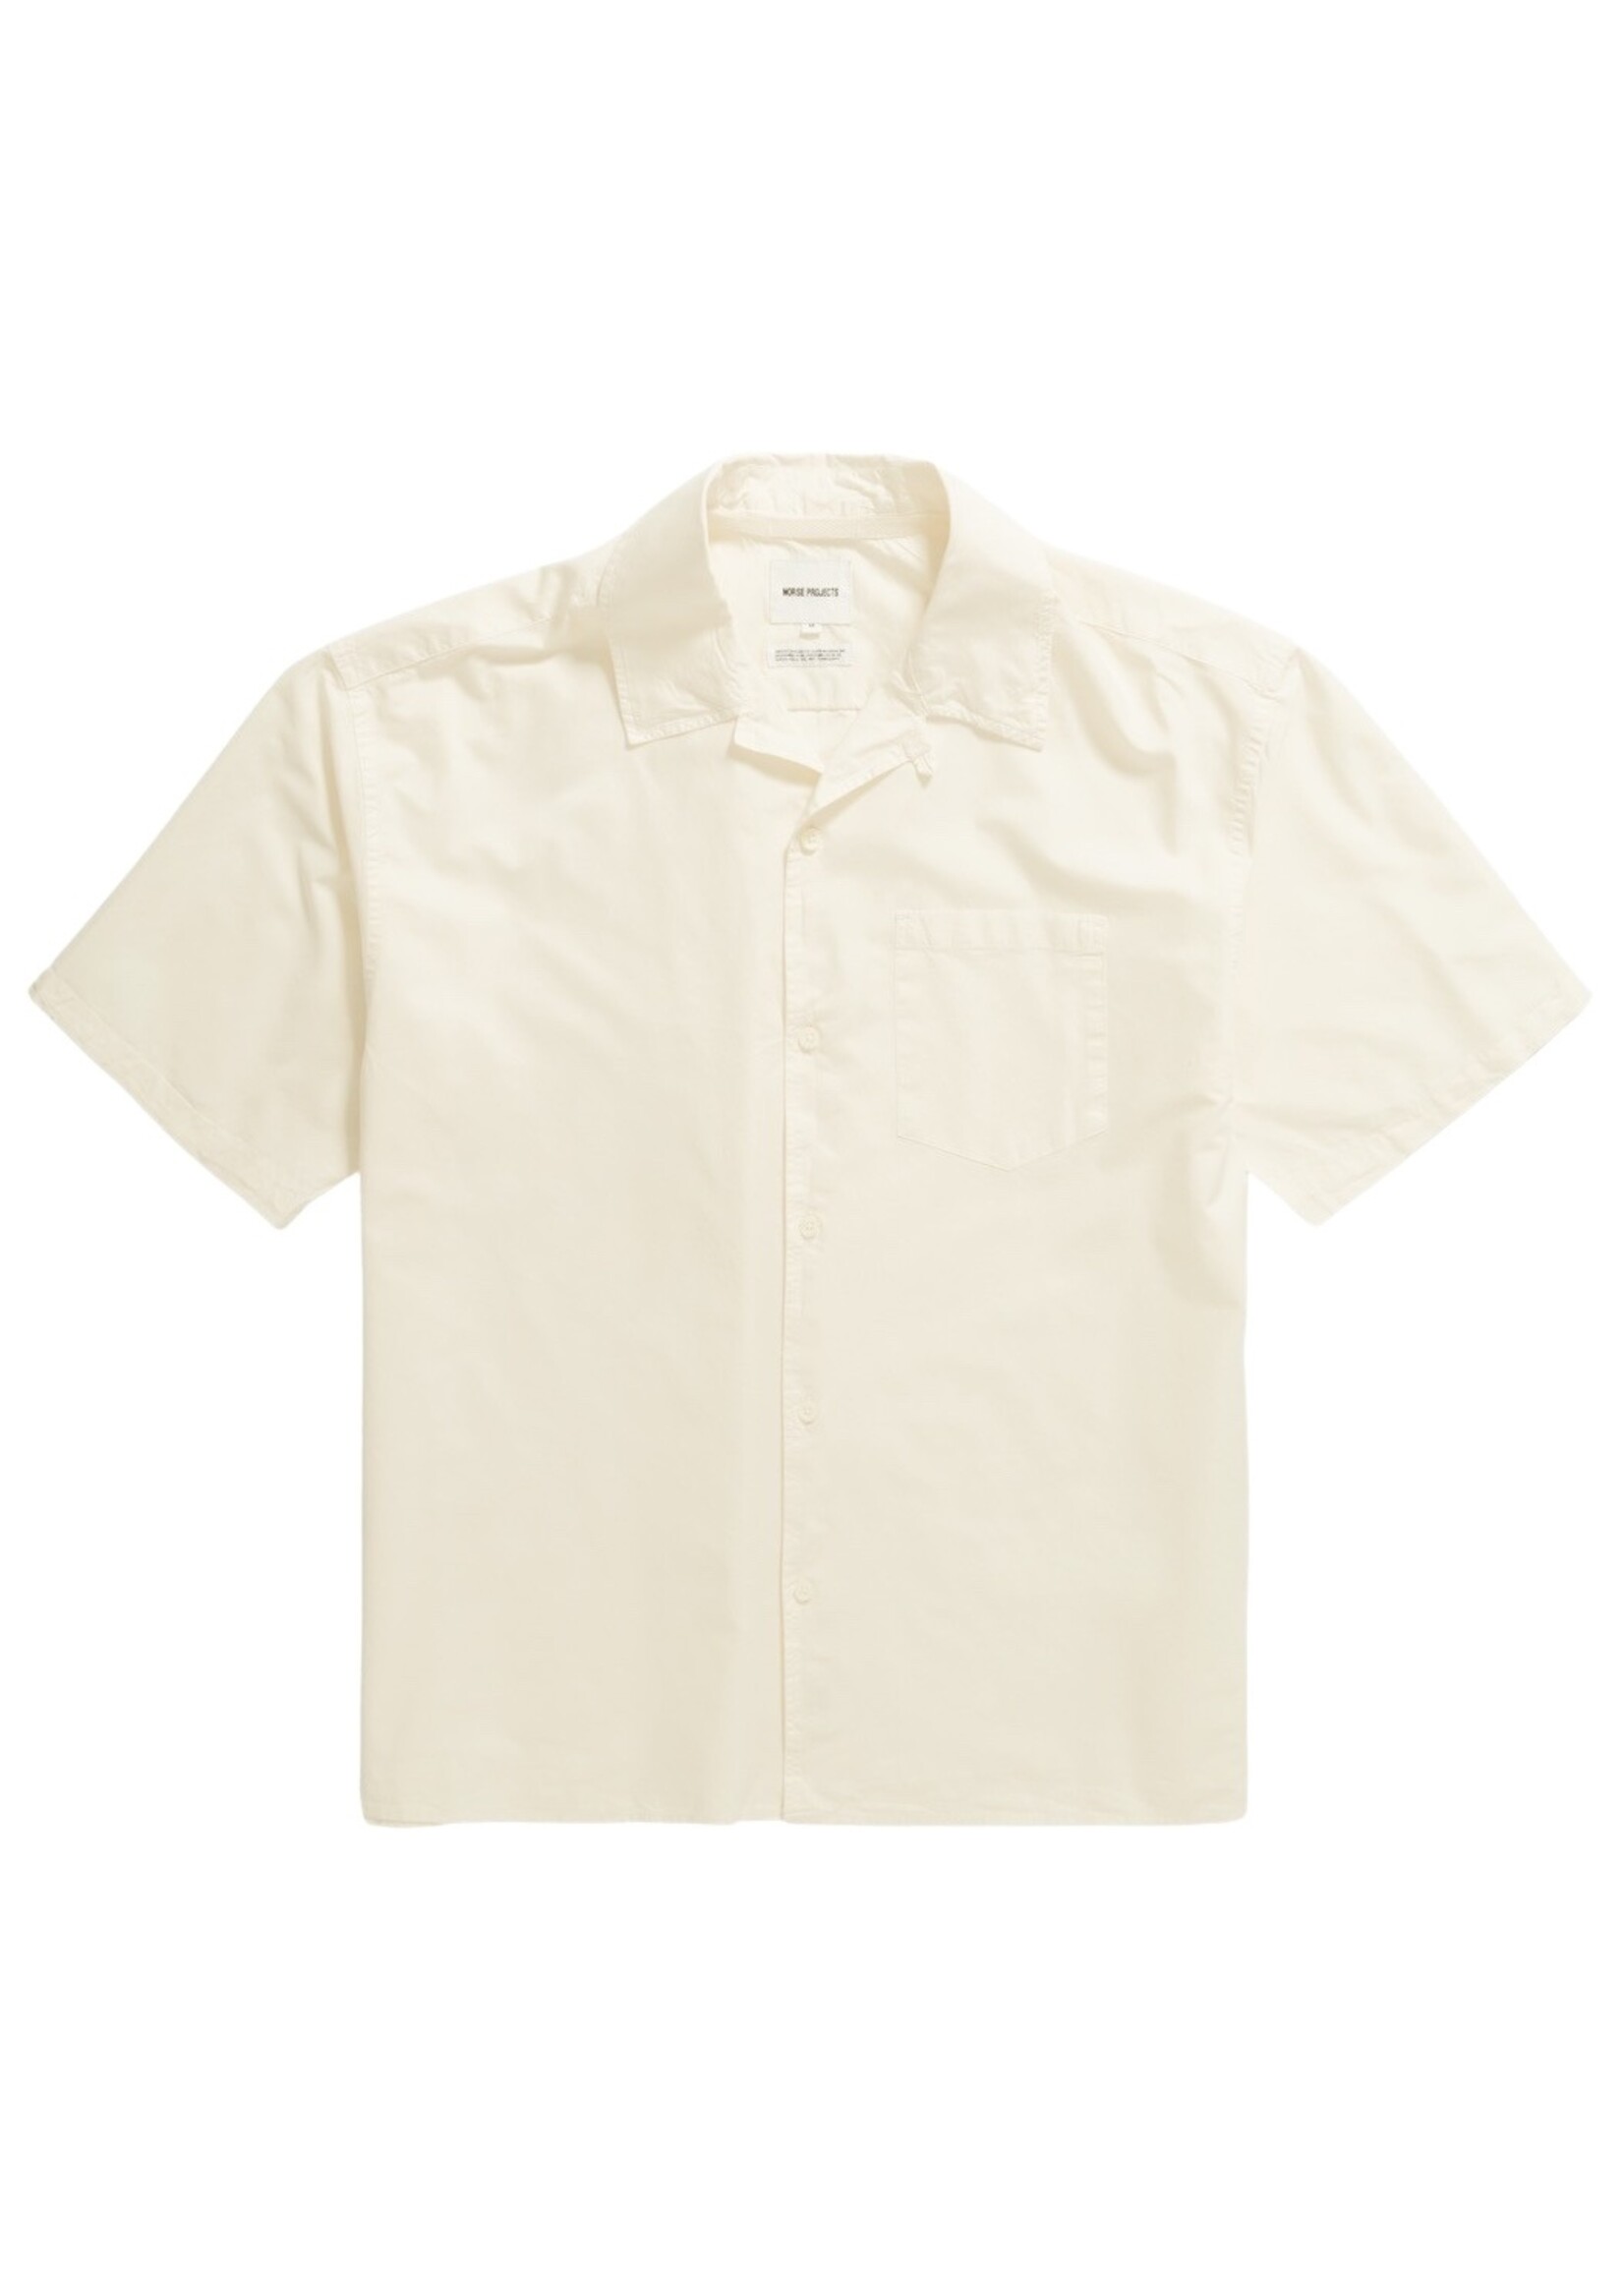 NORSE PROJECTS CARSTEN COTTON/TENCEL SHIRT